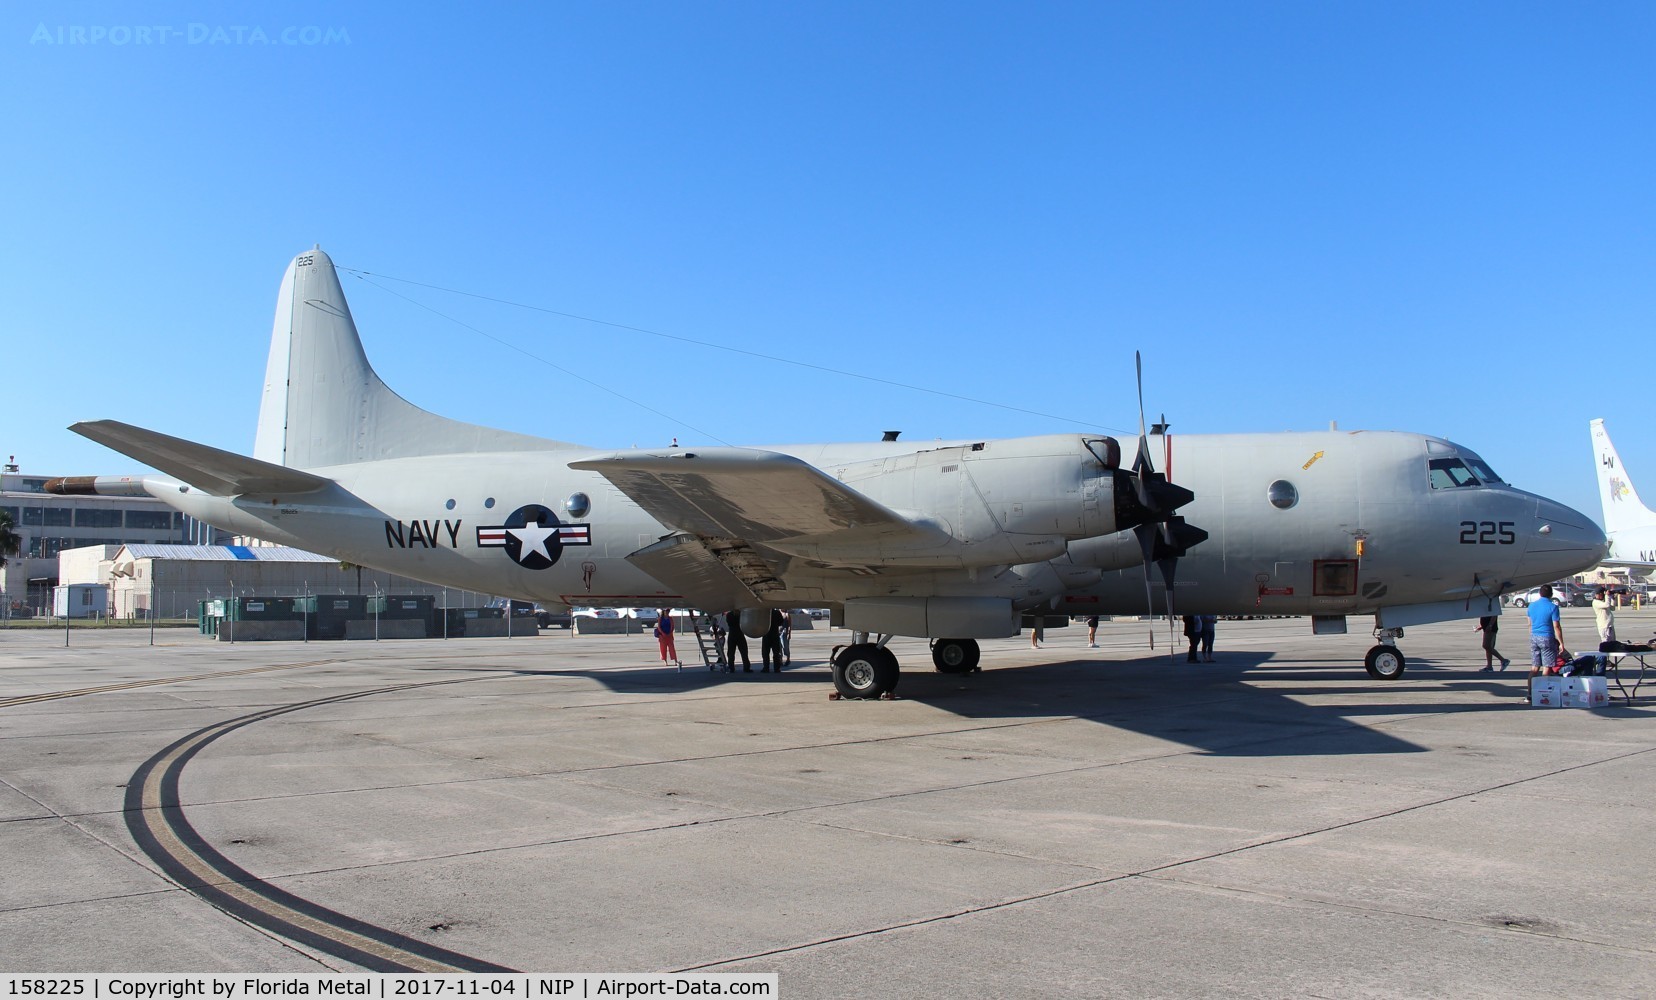 158225, Lockheed P-3C Orion C/N 285A-5570, P-3C Orion